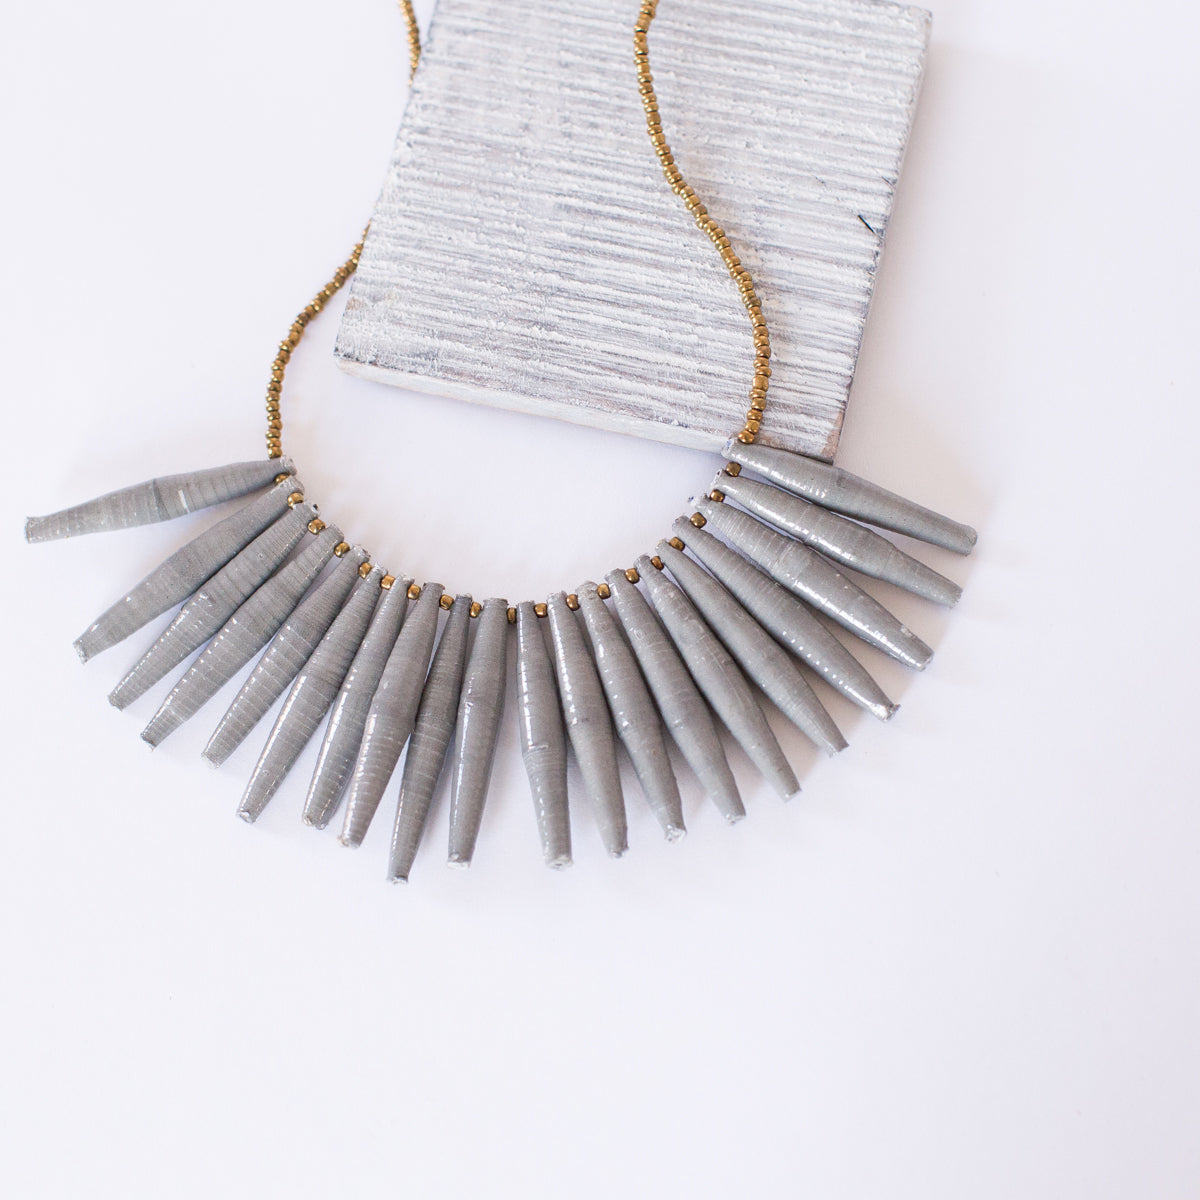 JustOne's necklace with long grey paper beads dangling off, handcrafted in Uganda